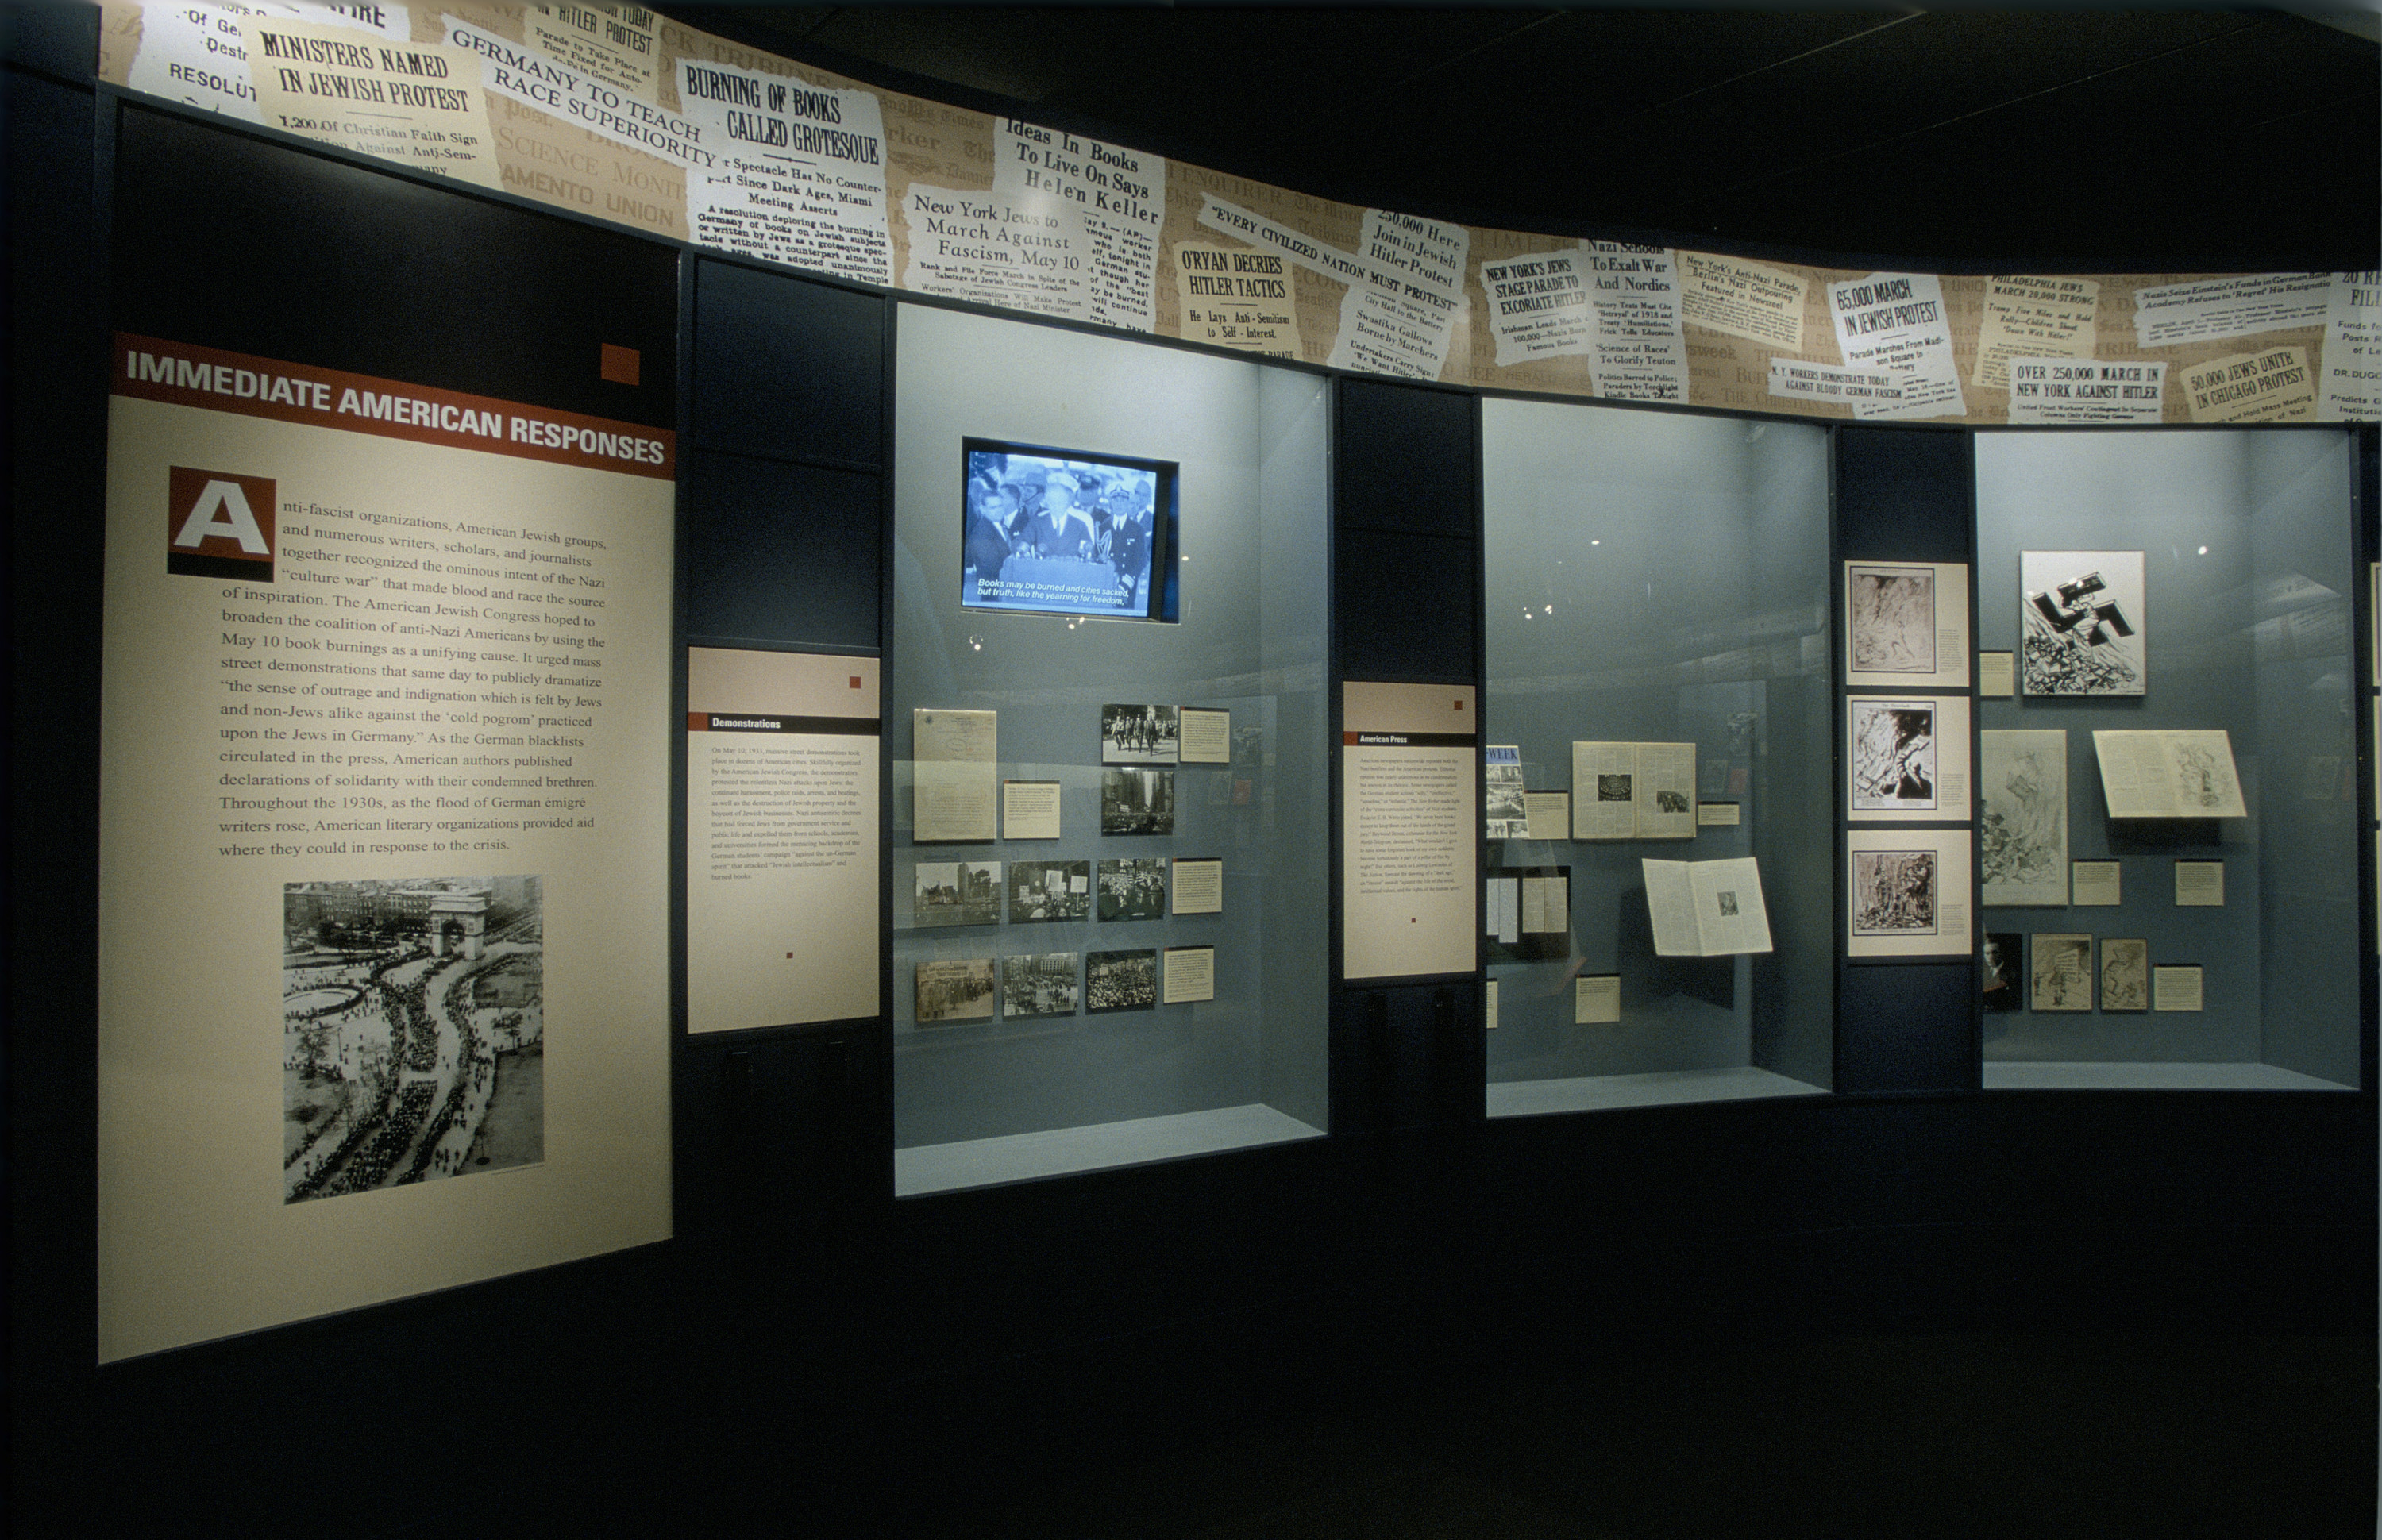 View of the Immediate American Responses section of the special exhibition "Fighting the Fires of Hate: America and the Nazi Book Burnings" (April 29 -- October 13, 2003), U.S. Holocaust Memorial Museum.